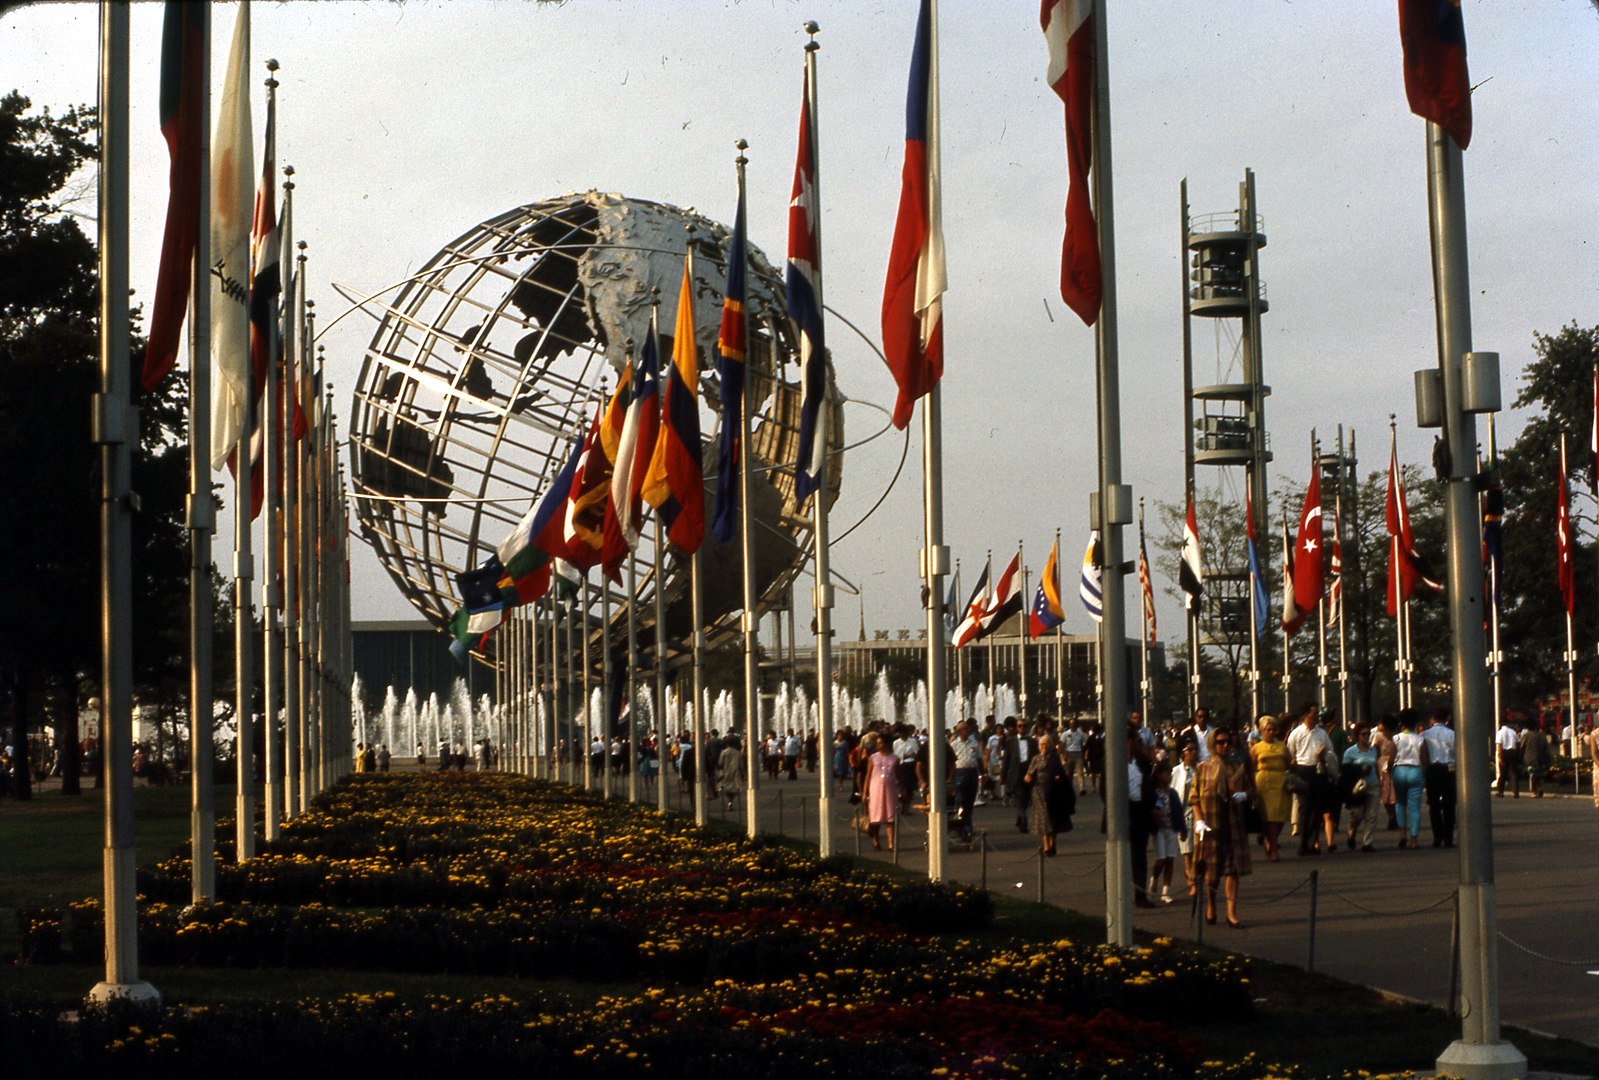 Unisphere with world flags